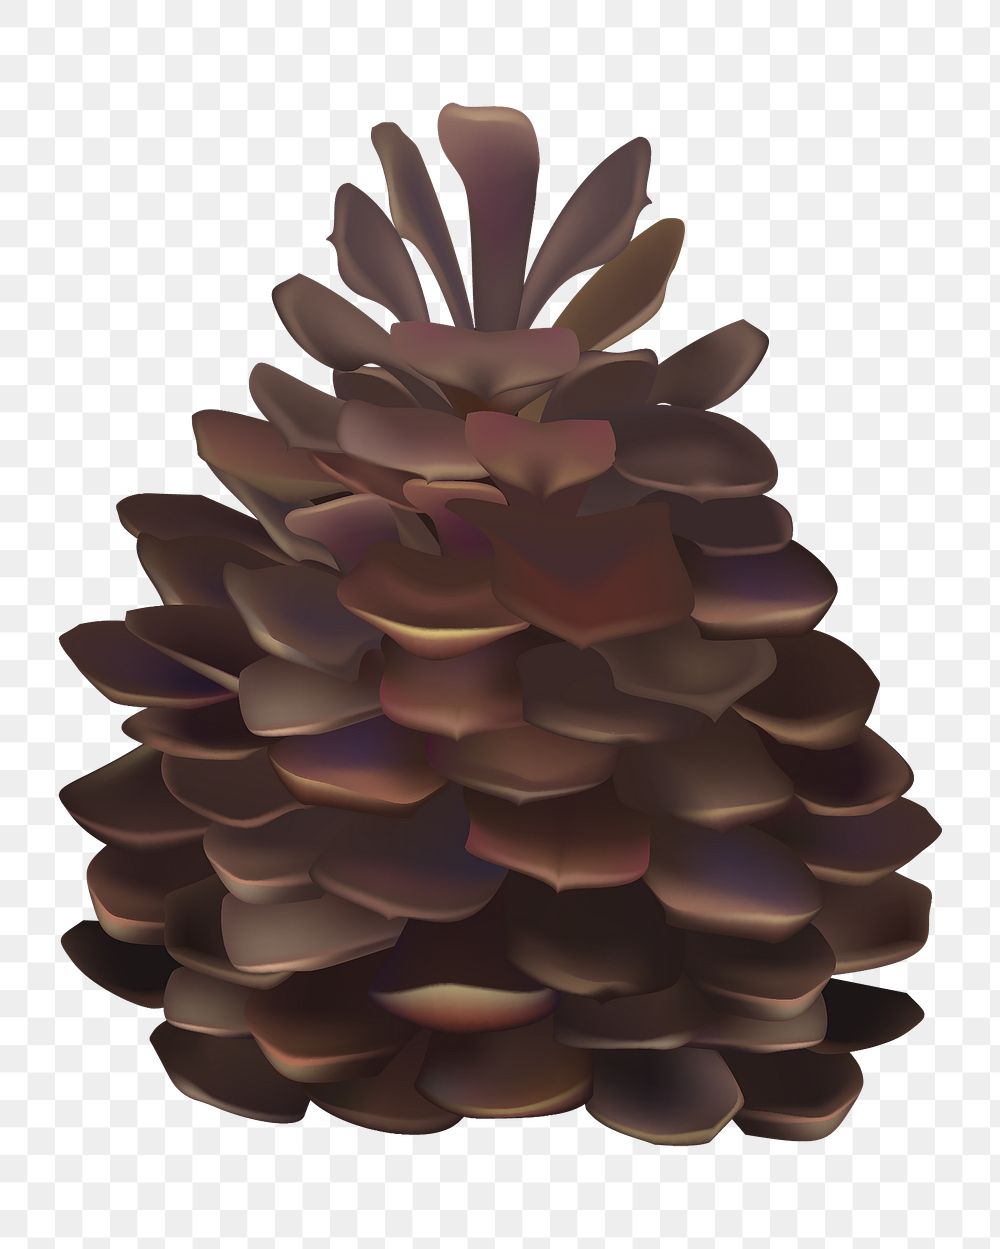 Pine cone png, transparent background